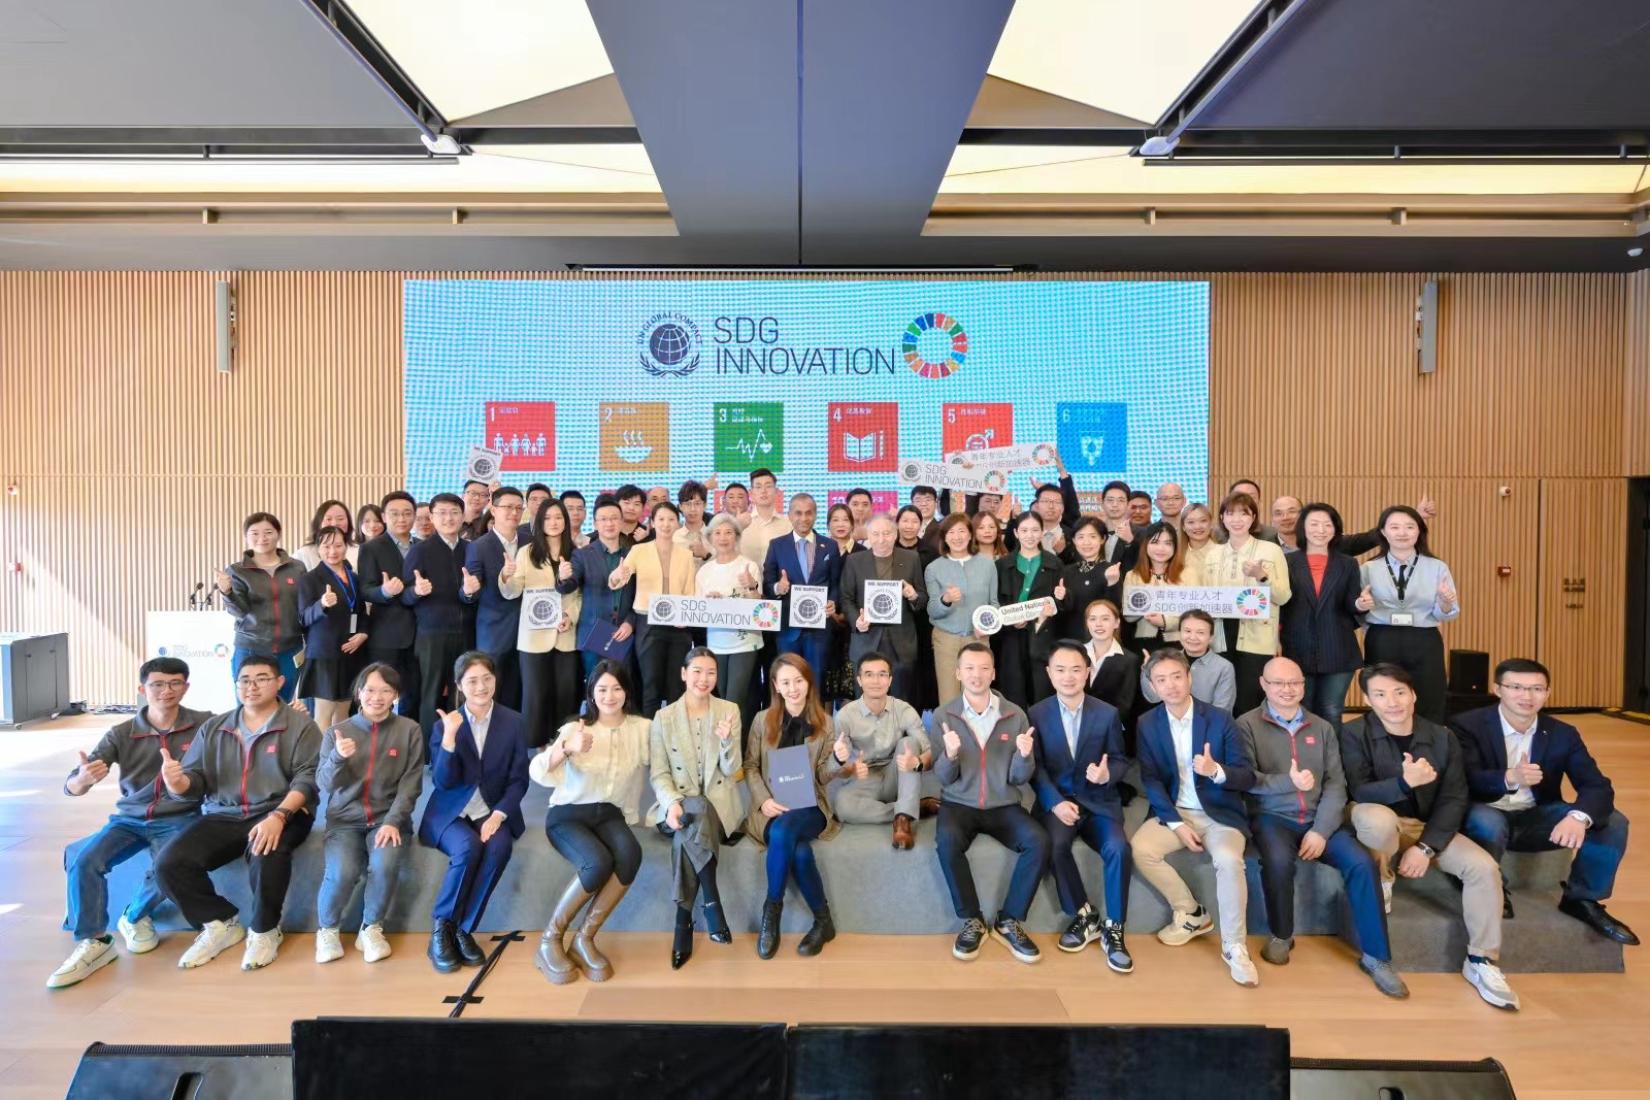 Attendees of the SDG Innovation Accelerator Programme closing ceremony